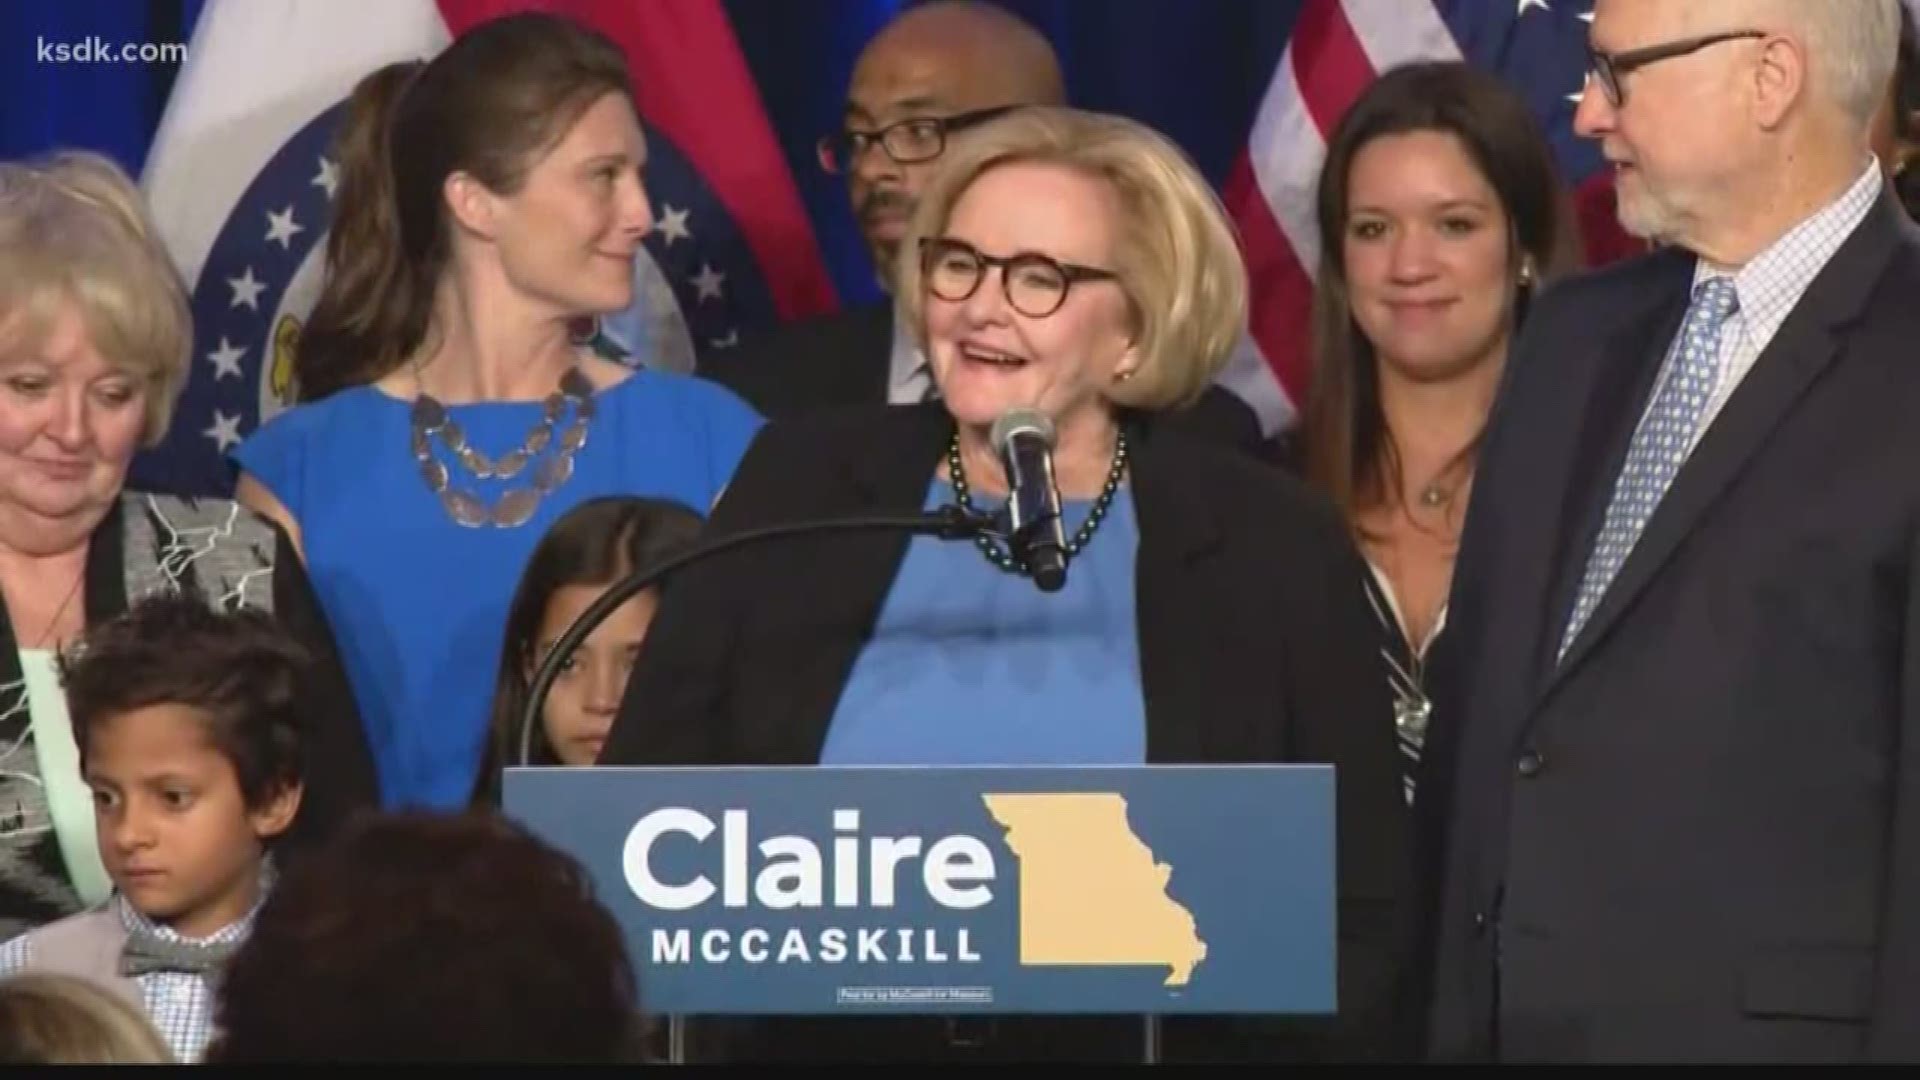 Claire McCaskill announced she will be joining NBC News and MSNBC as a political analyst.